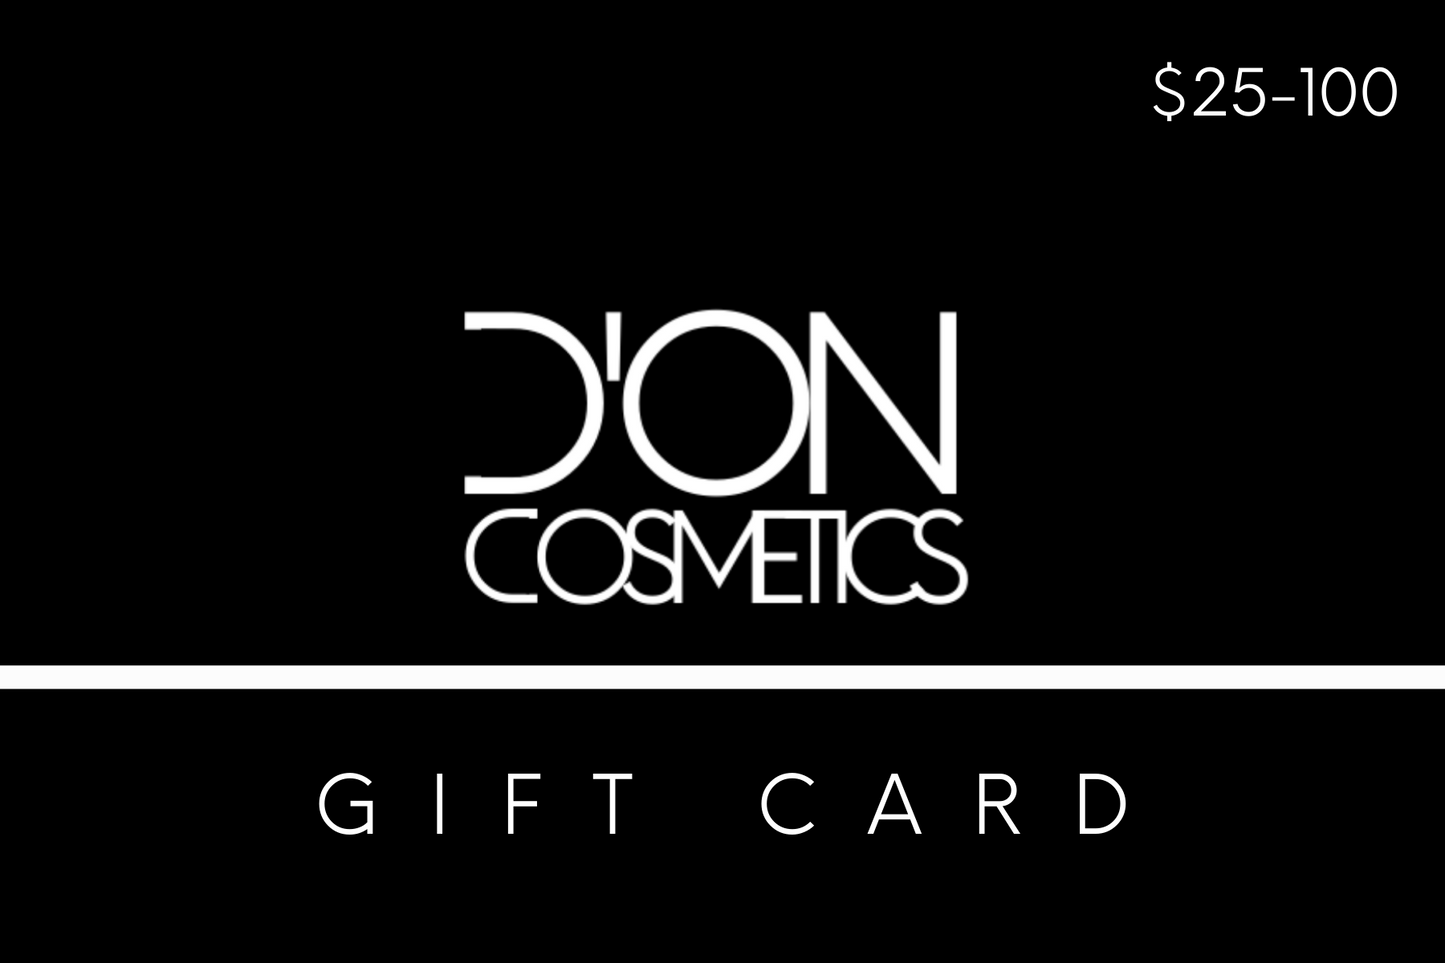 D'on Cosmetics Gift Card